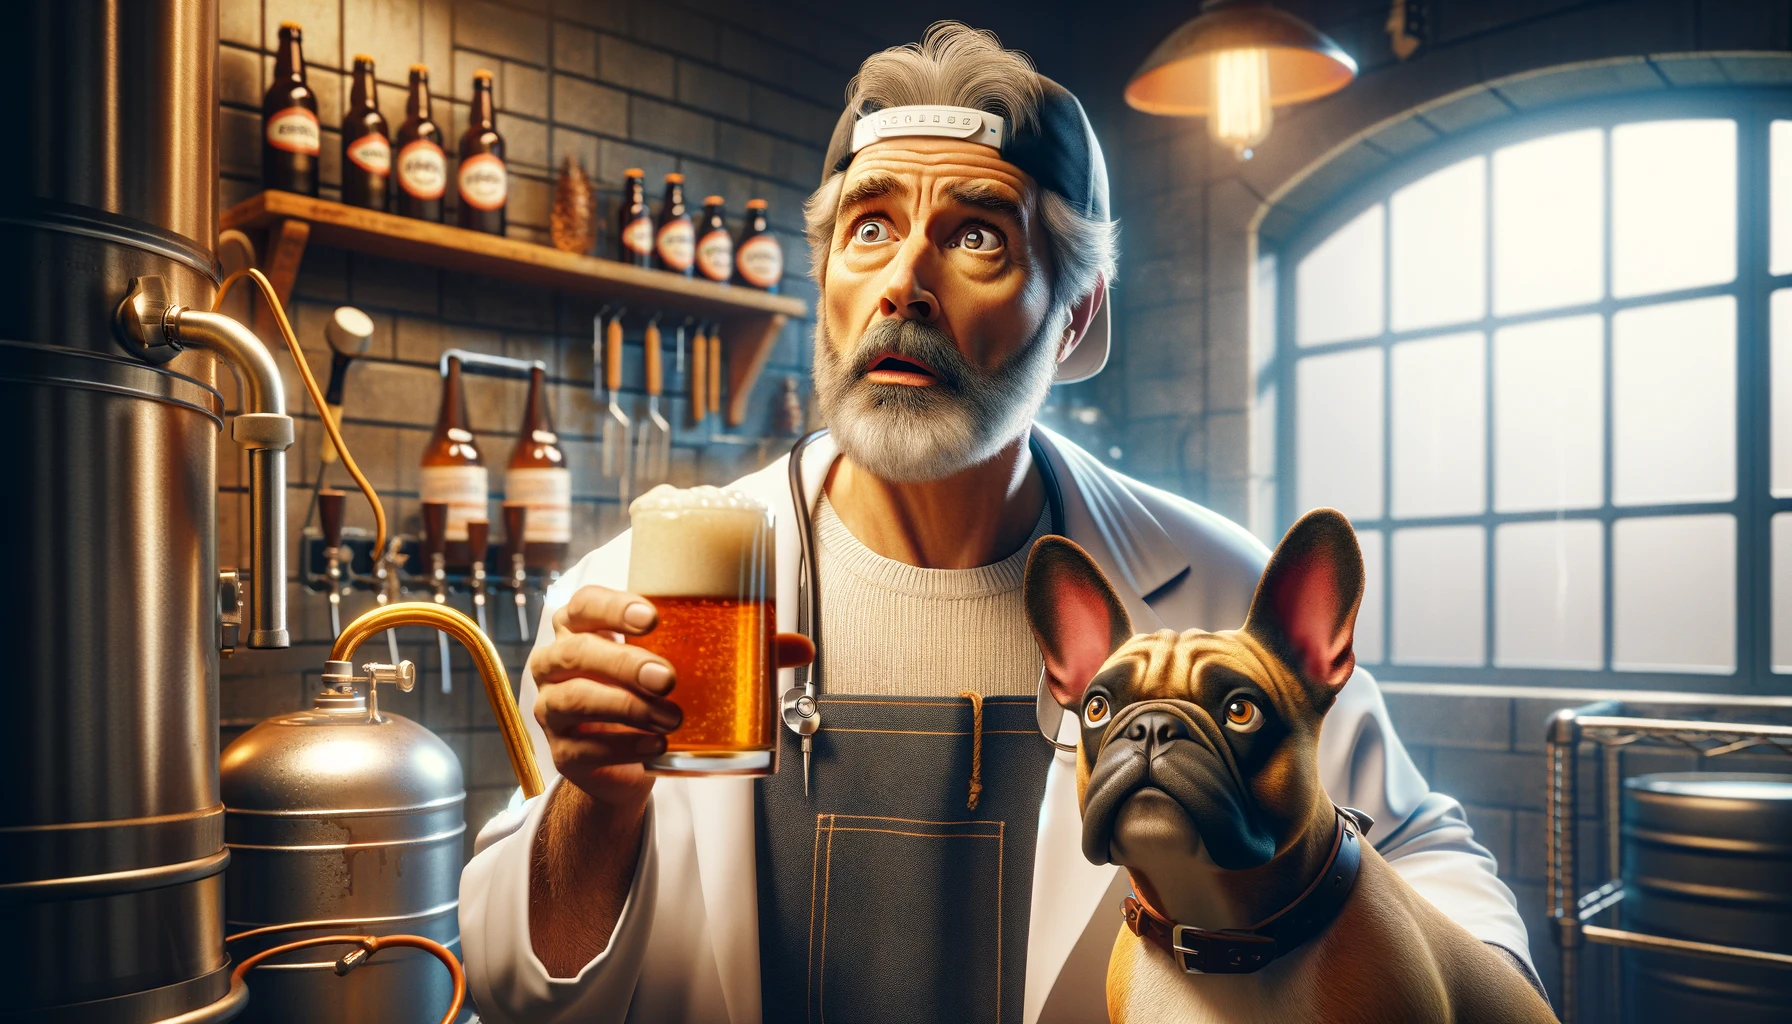 An image capturing a moment of surprise and admiration by Dr. Hans as he examines the unexpected result of his brewing experiment, a West Coast IPA